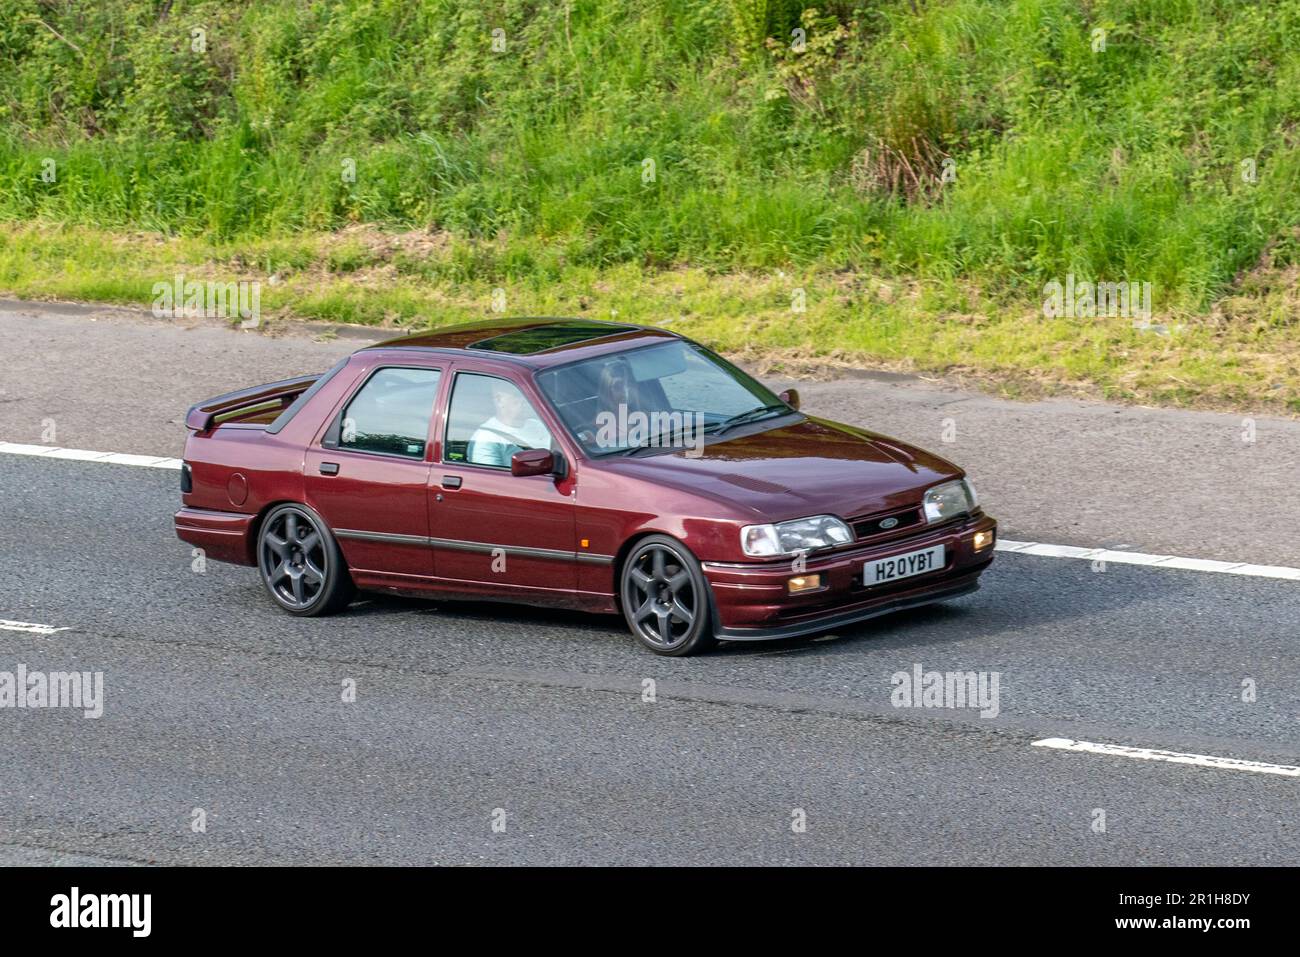 1990 90s nineties Ford Sierra Sapphire Cosworth Red Car Saloon Petrol 1993 cc; travelling on the M61 motorway, UK Stock Photo